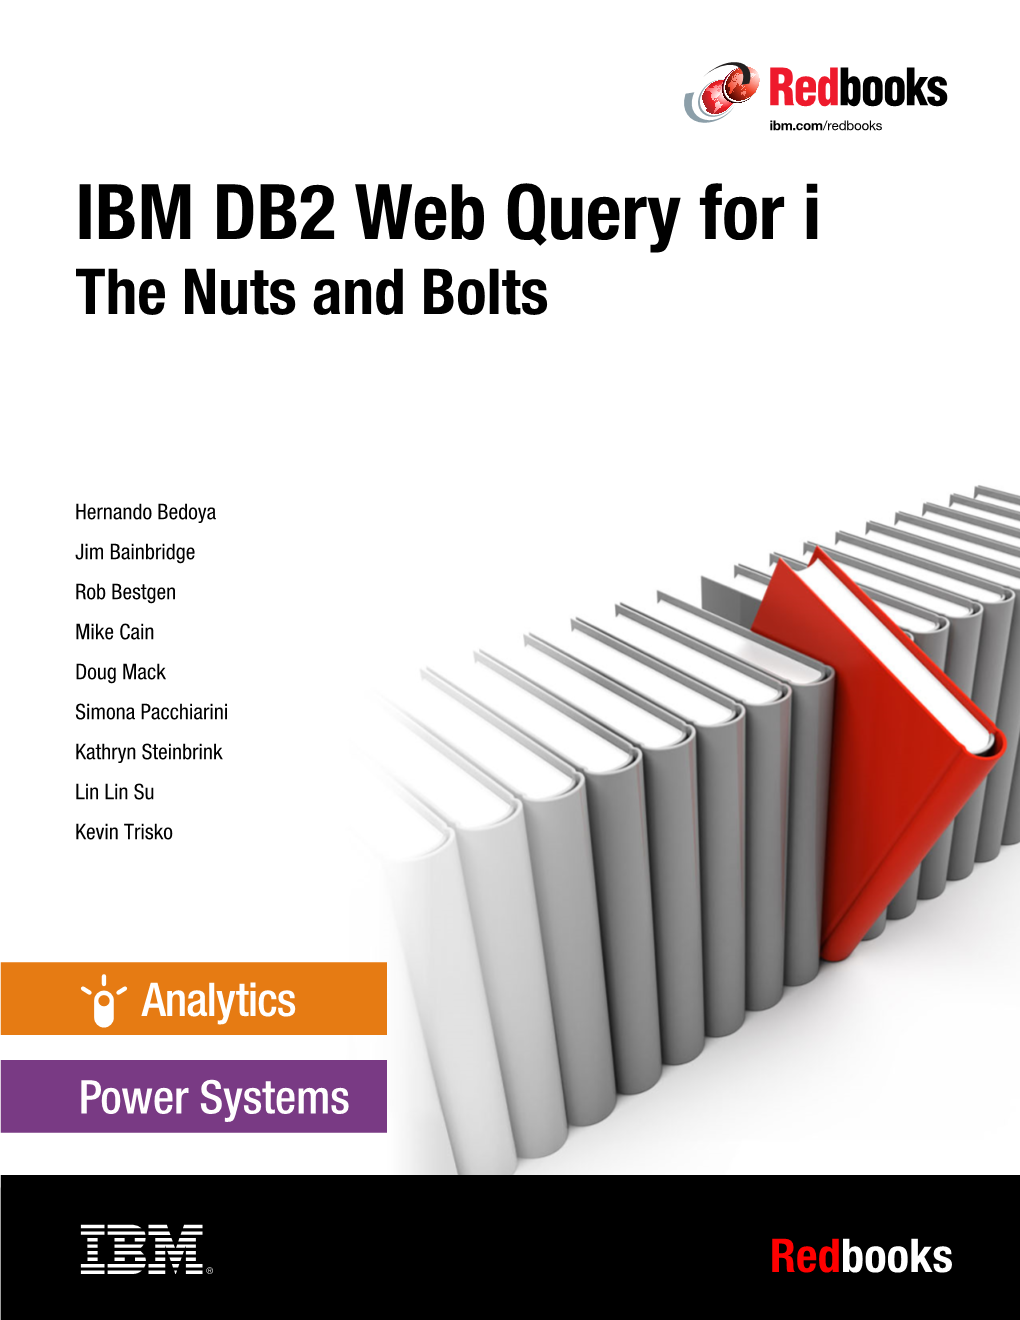 IBM DB2 Web Query for I: the Nuts and Bolts